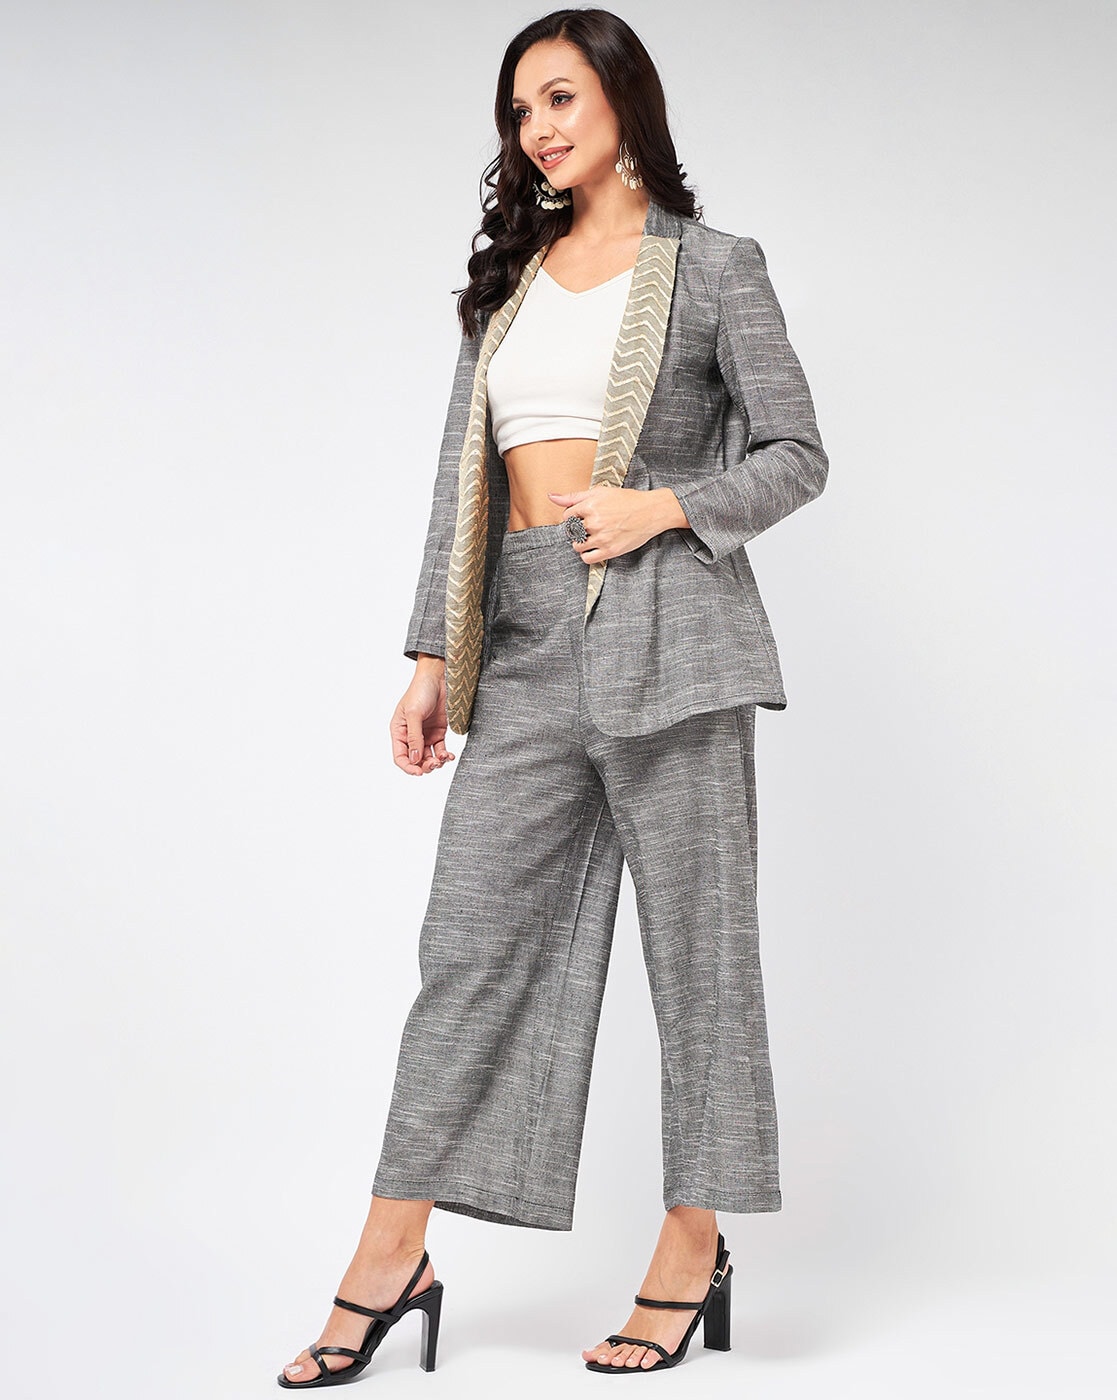 Women's Olive Green w Red Check Tweed Suit with Trousers - That British  Tweed Company